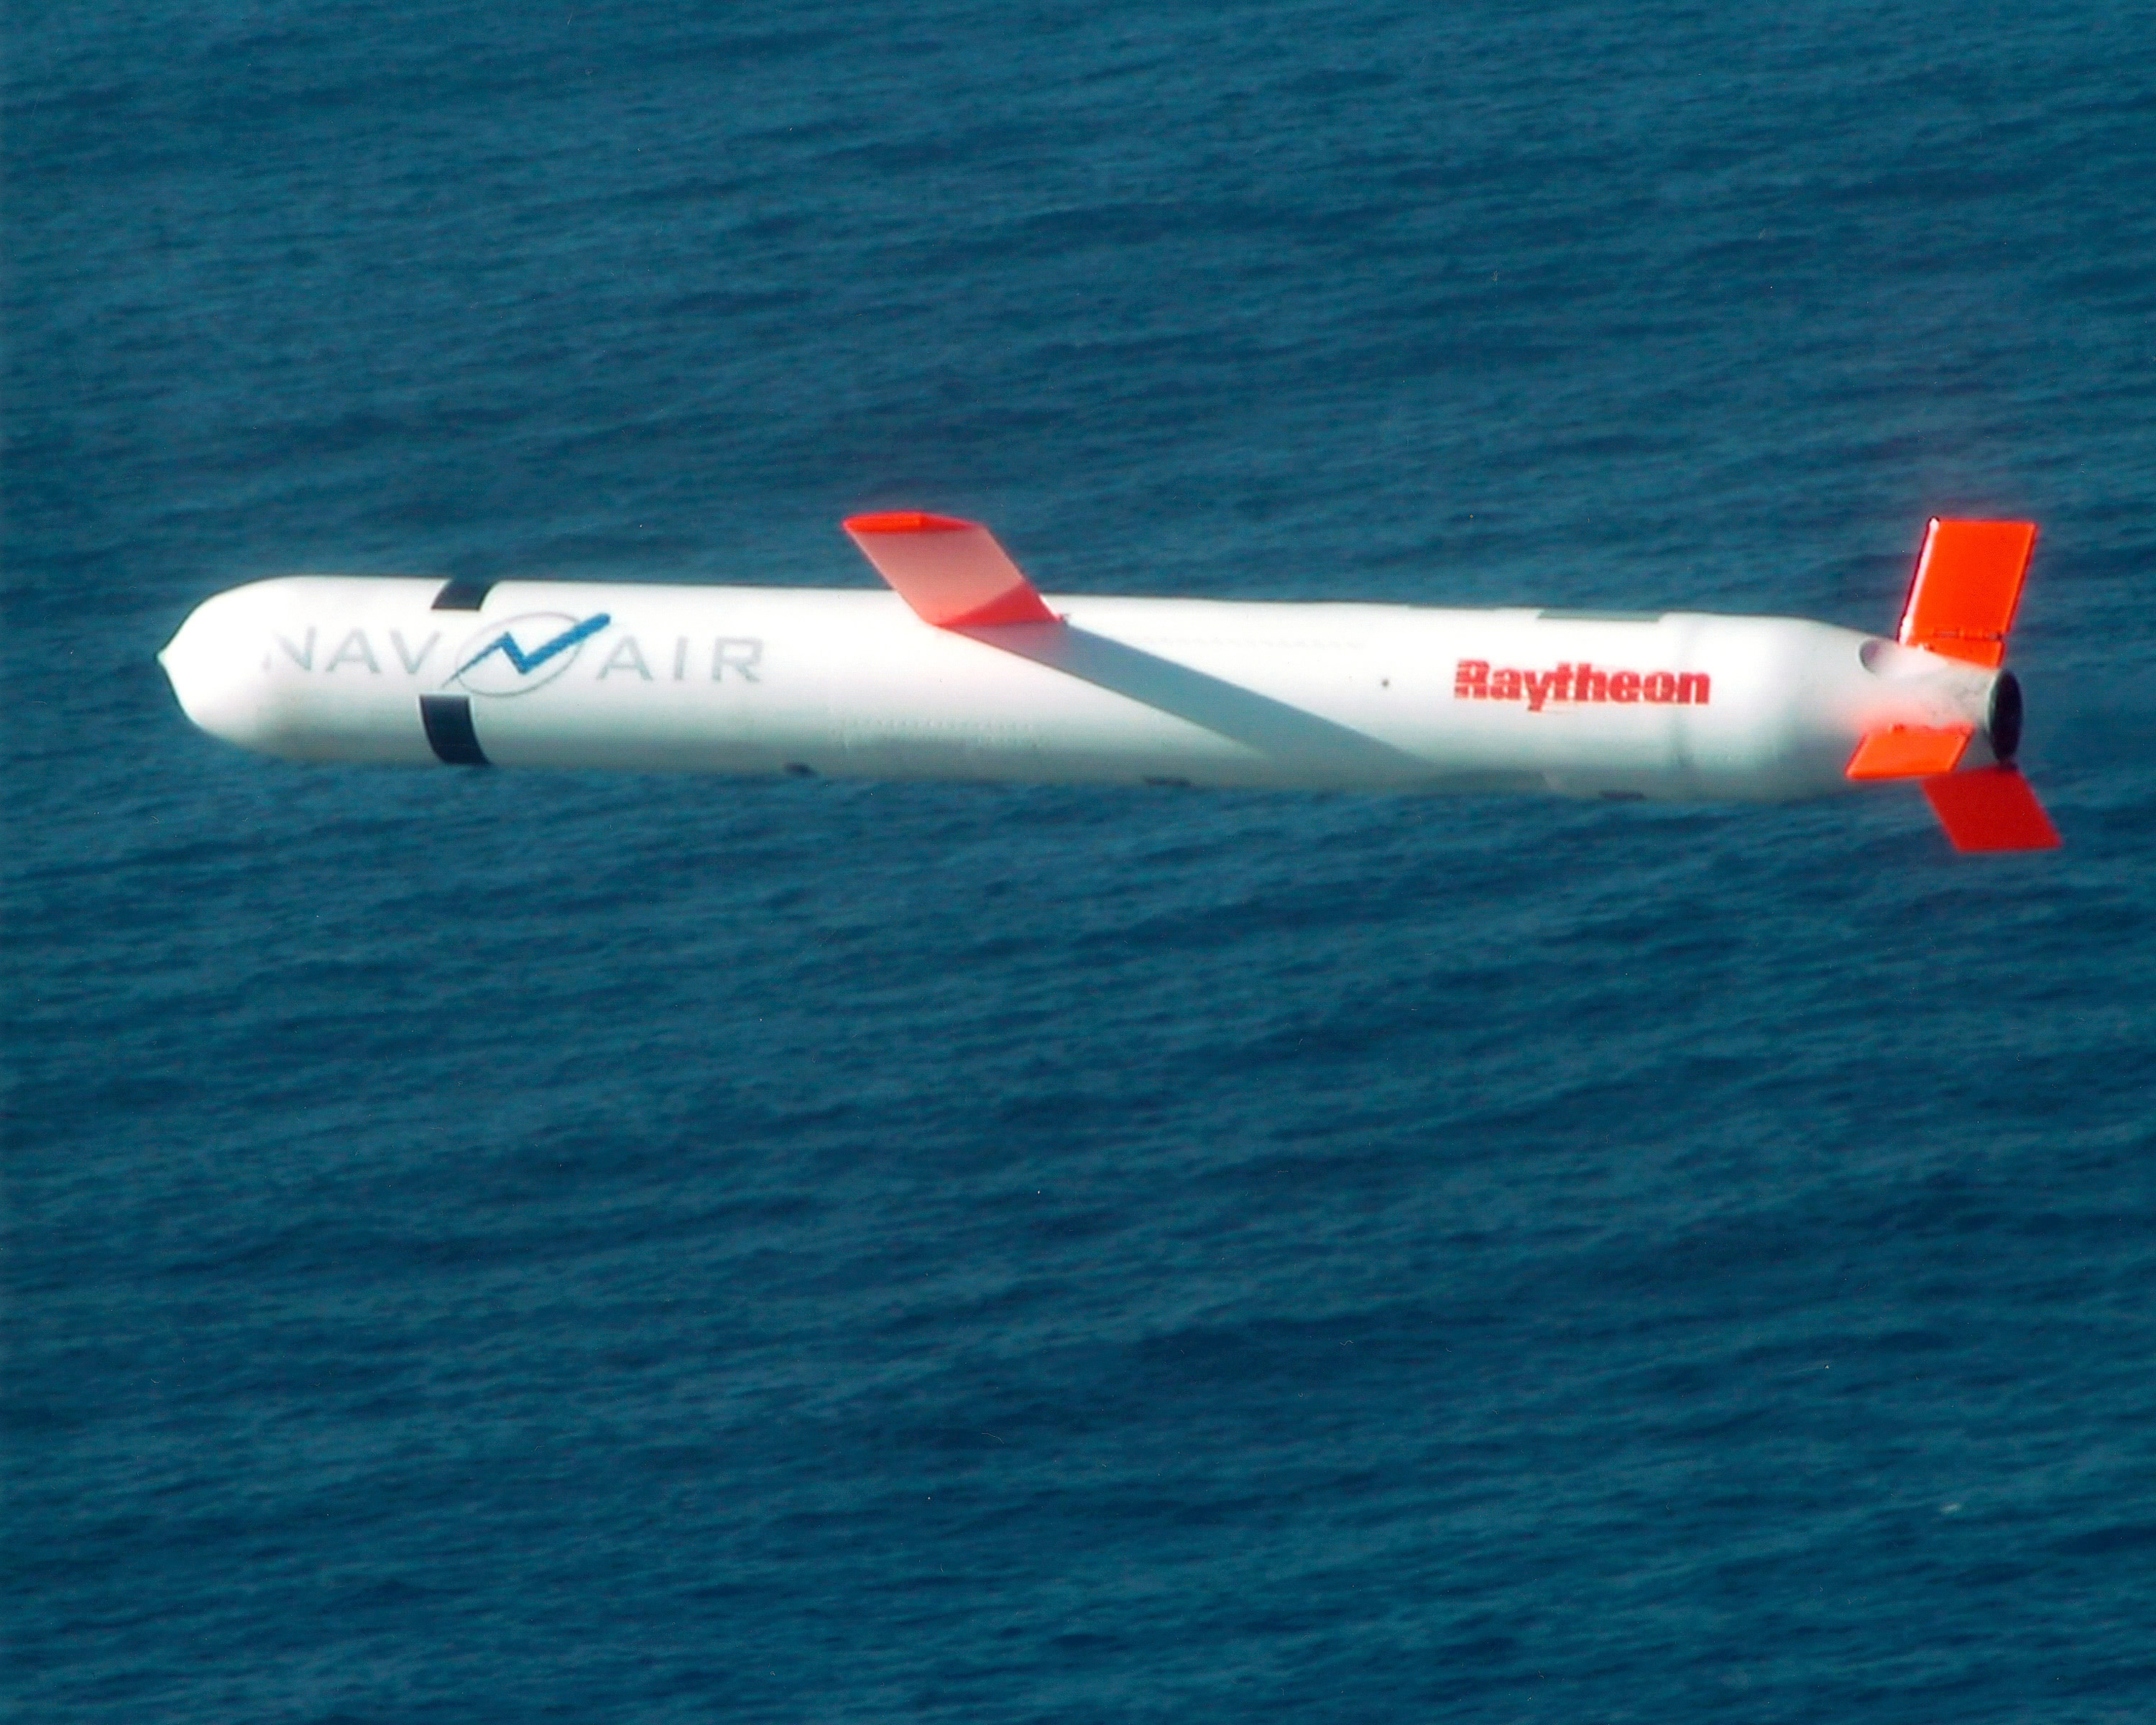 The 3,000th Tomahawk Block IV cruise missile was delivered to the U.S. Navy in October 2013. 